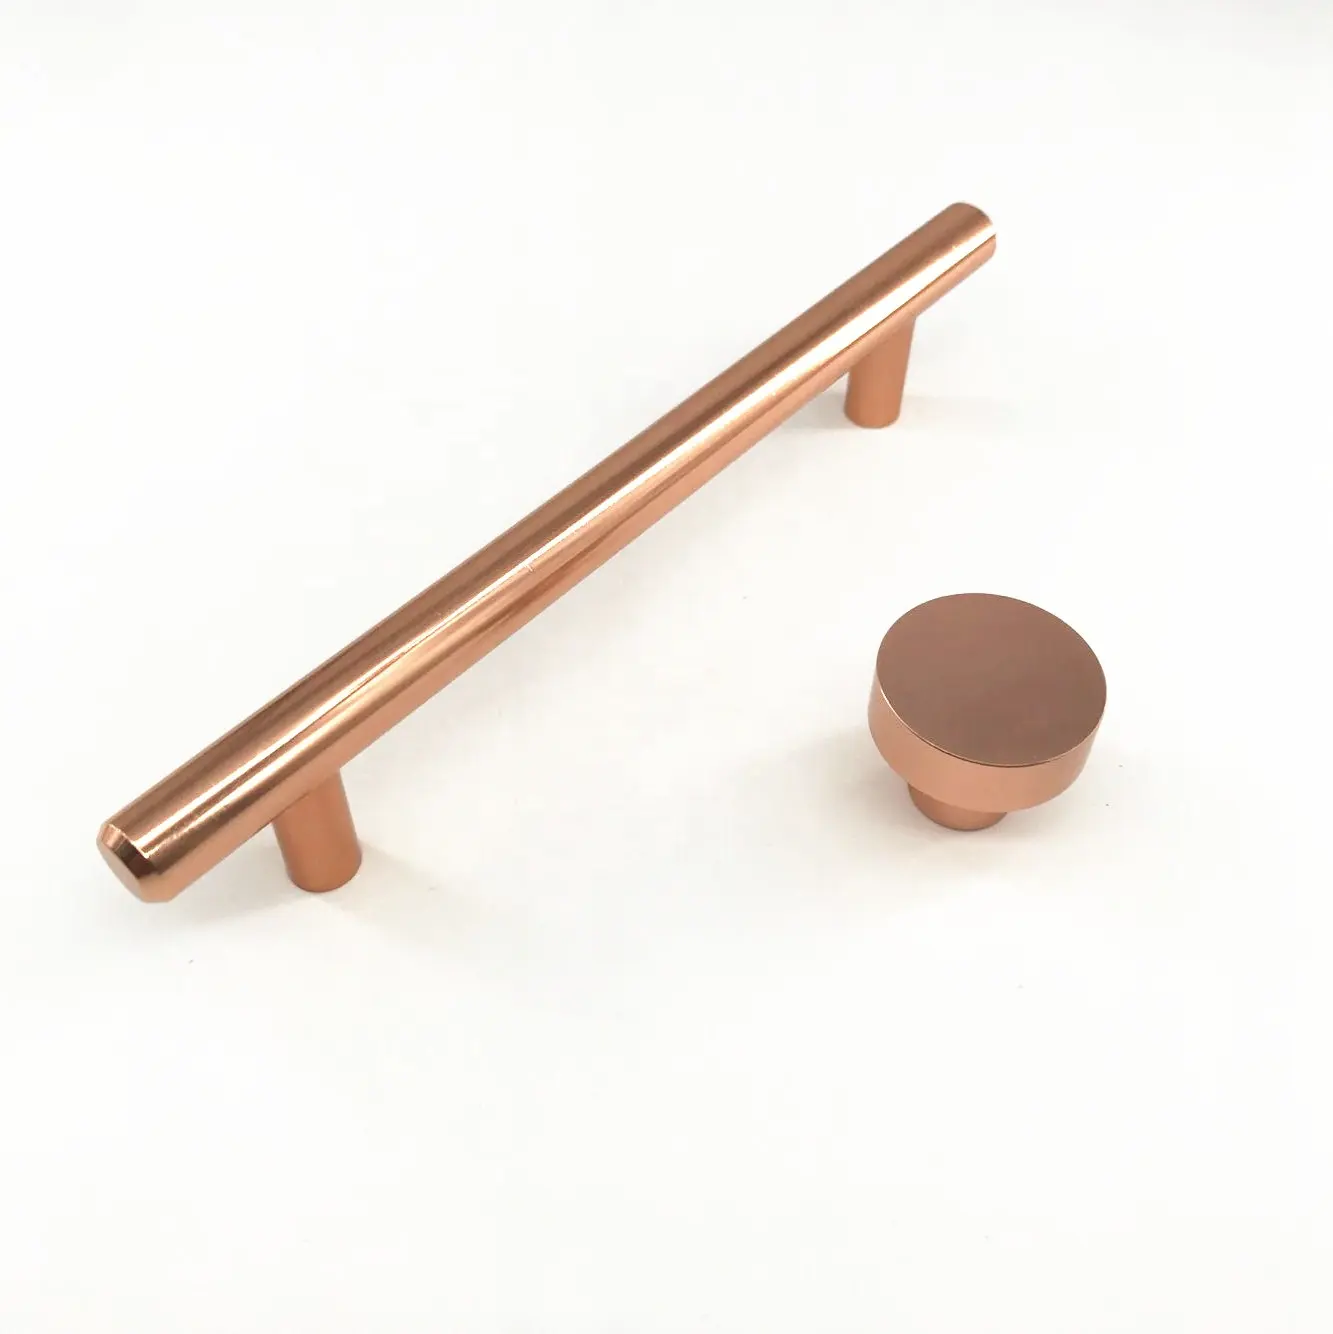 T Bar Furniture Hardware Home Cabinet Fitting Drawer Kitchen Rose Gold Handle And Knobs